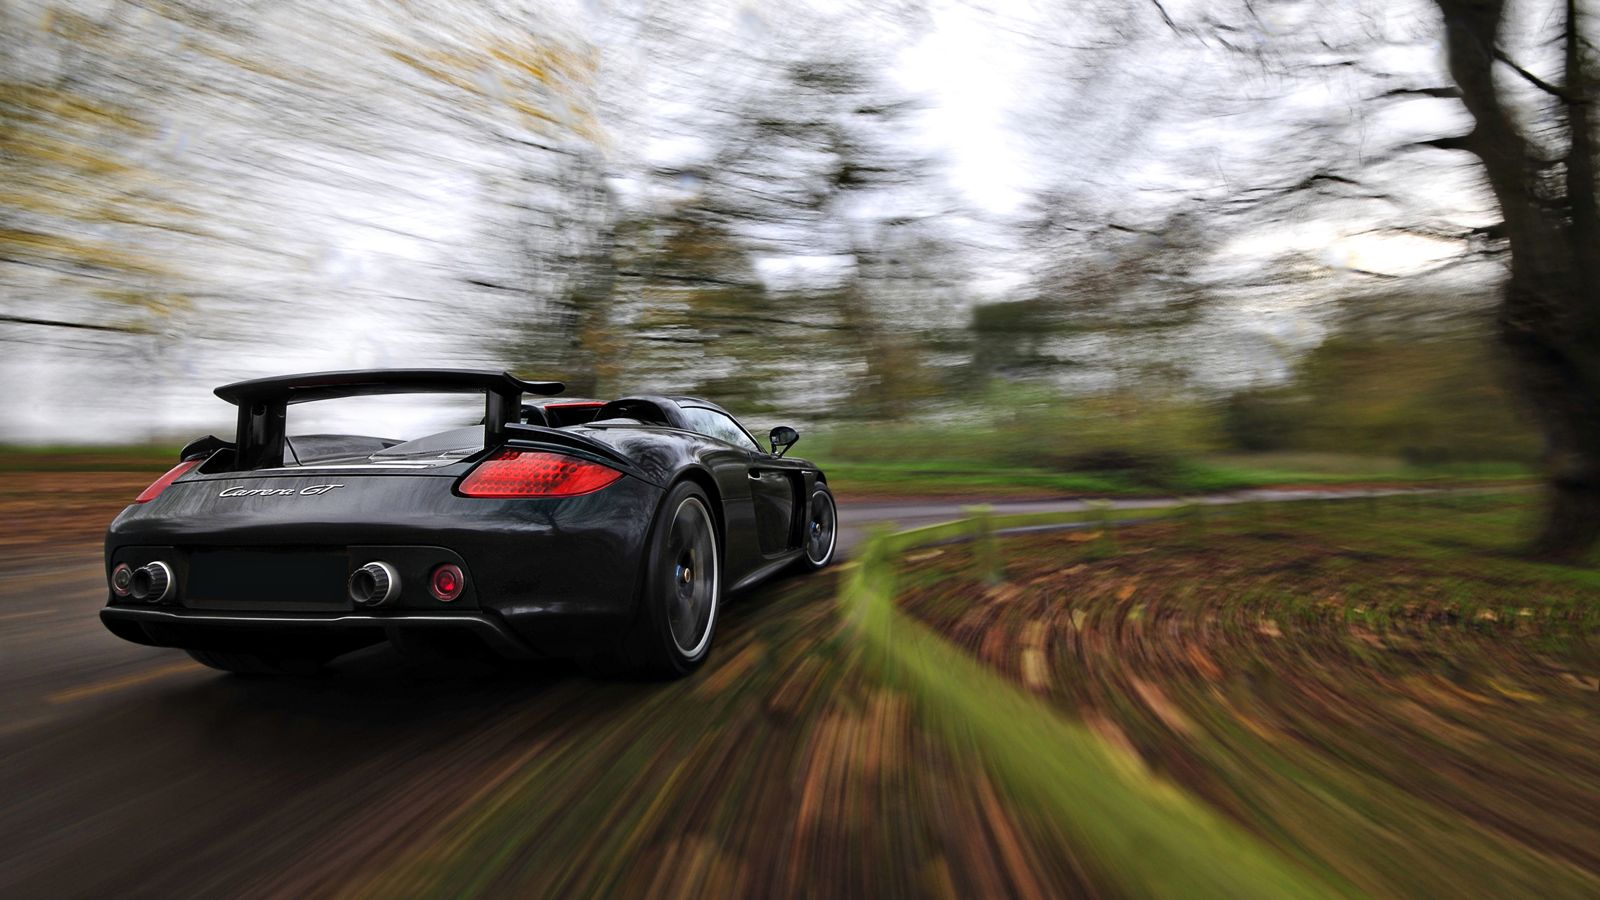 Your Ridiculously Cool Porsche Carrera Gt Wallpaper Is Here